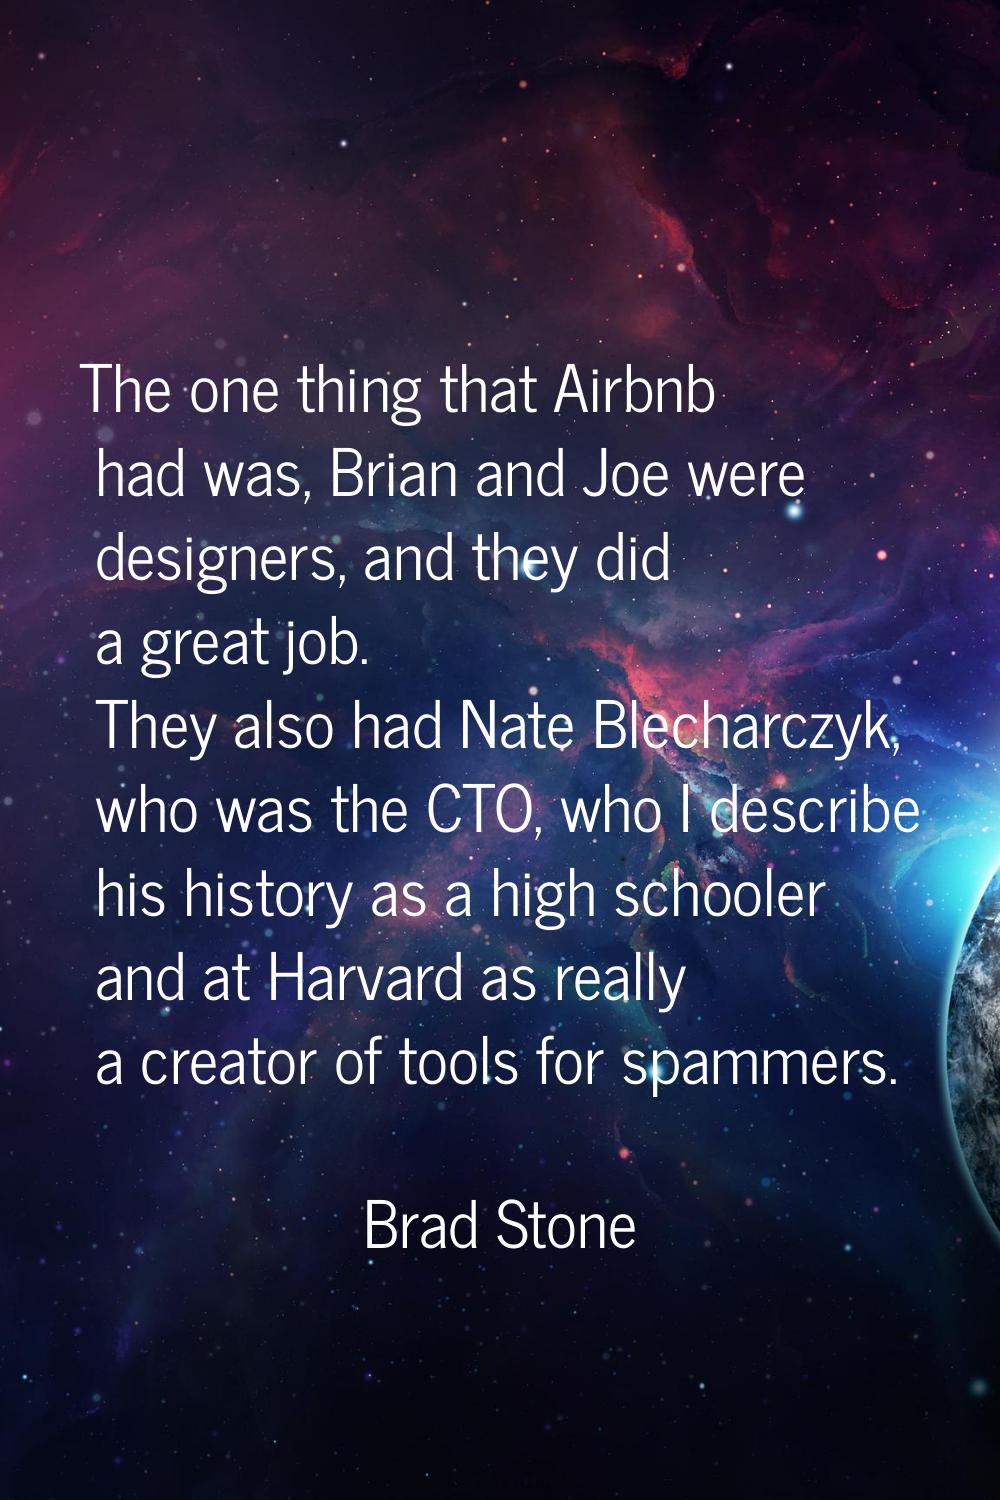 The one thing that Airbnb had was, Brian and Joe were designers, and they did a great job. They als